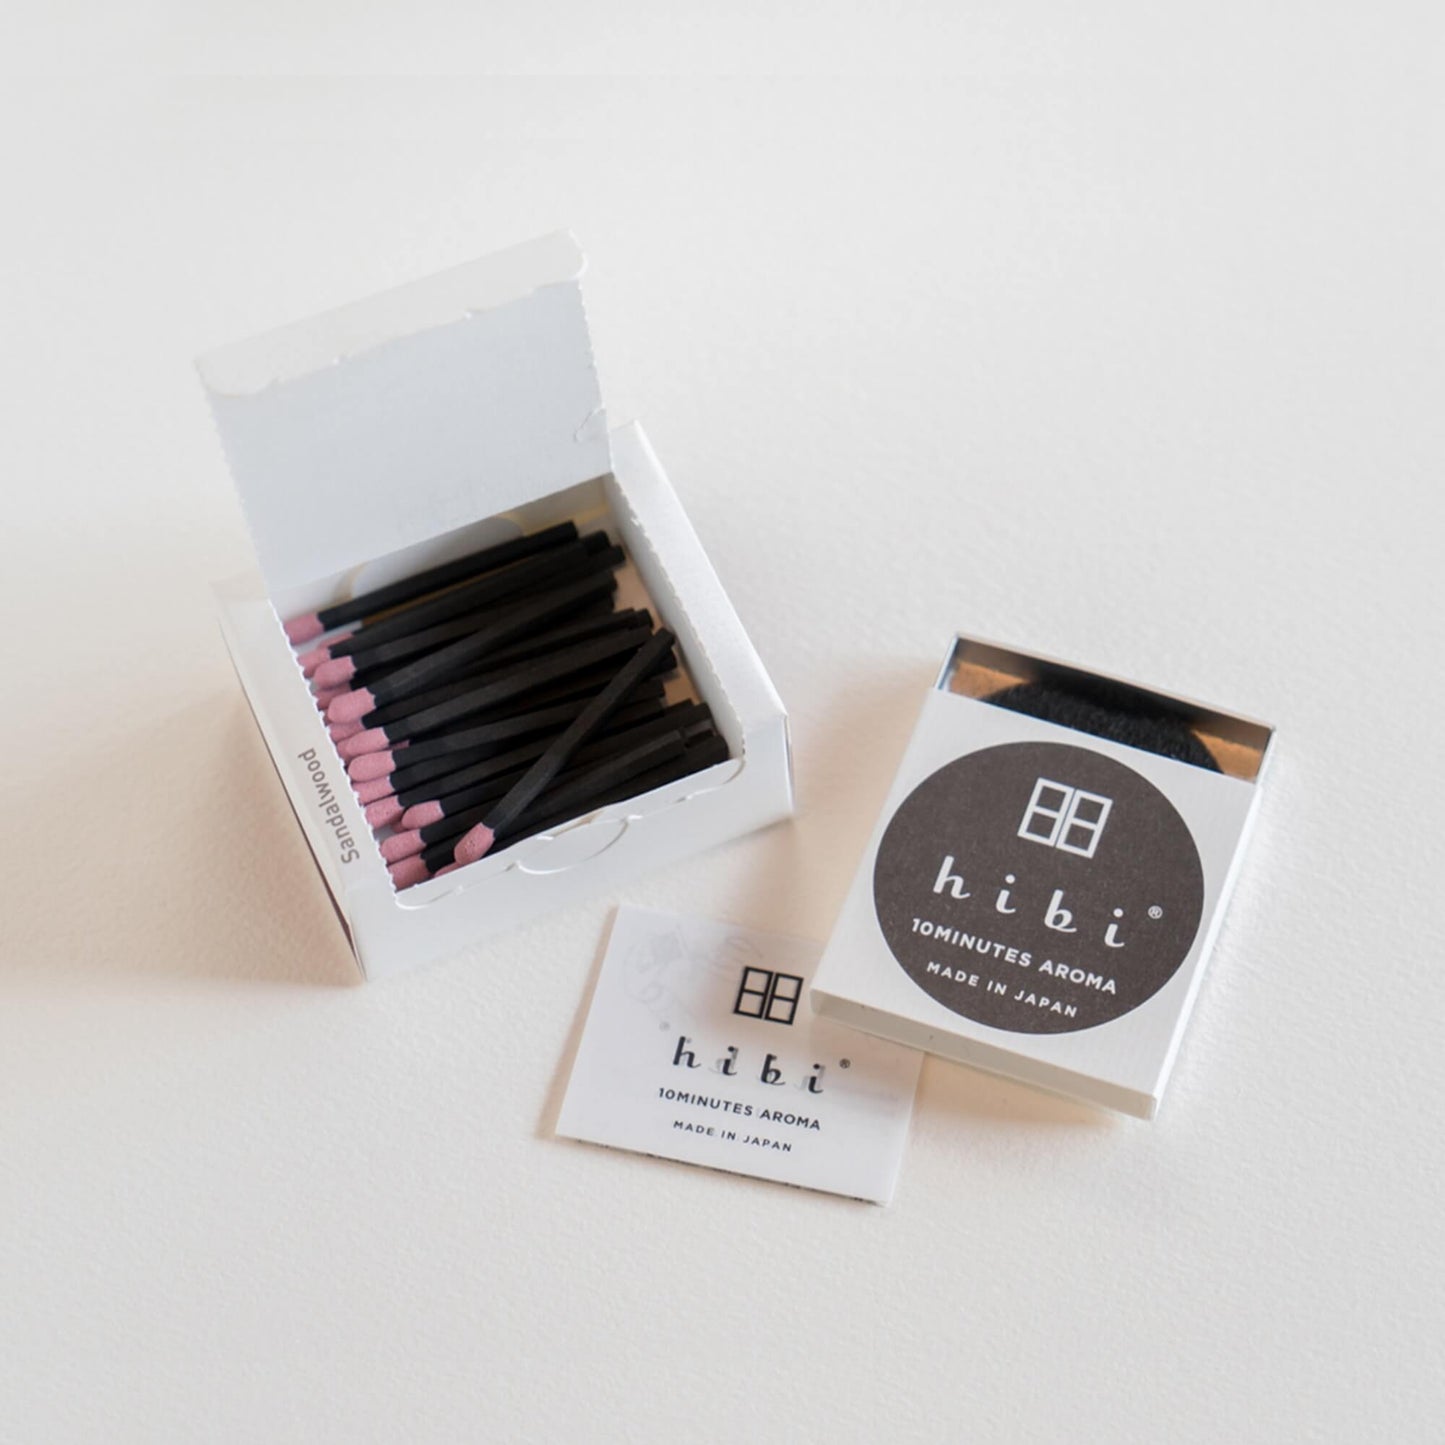 hibi 10 minute incense : traditional scent large box